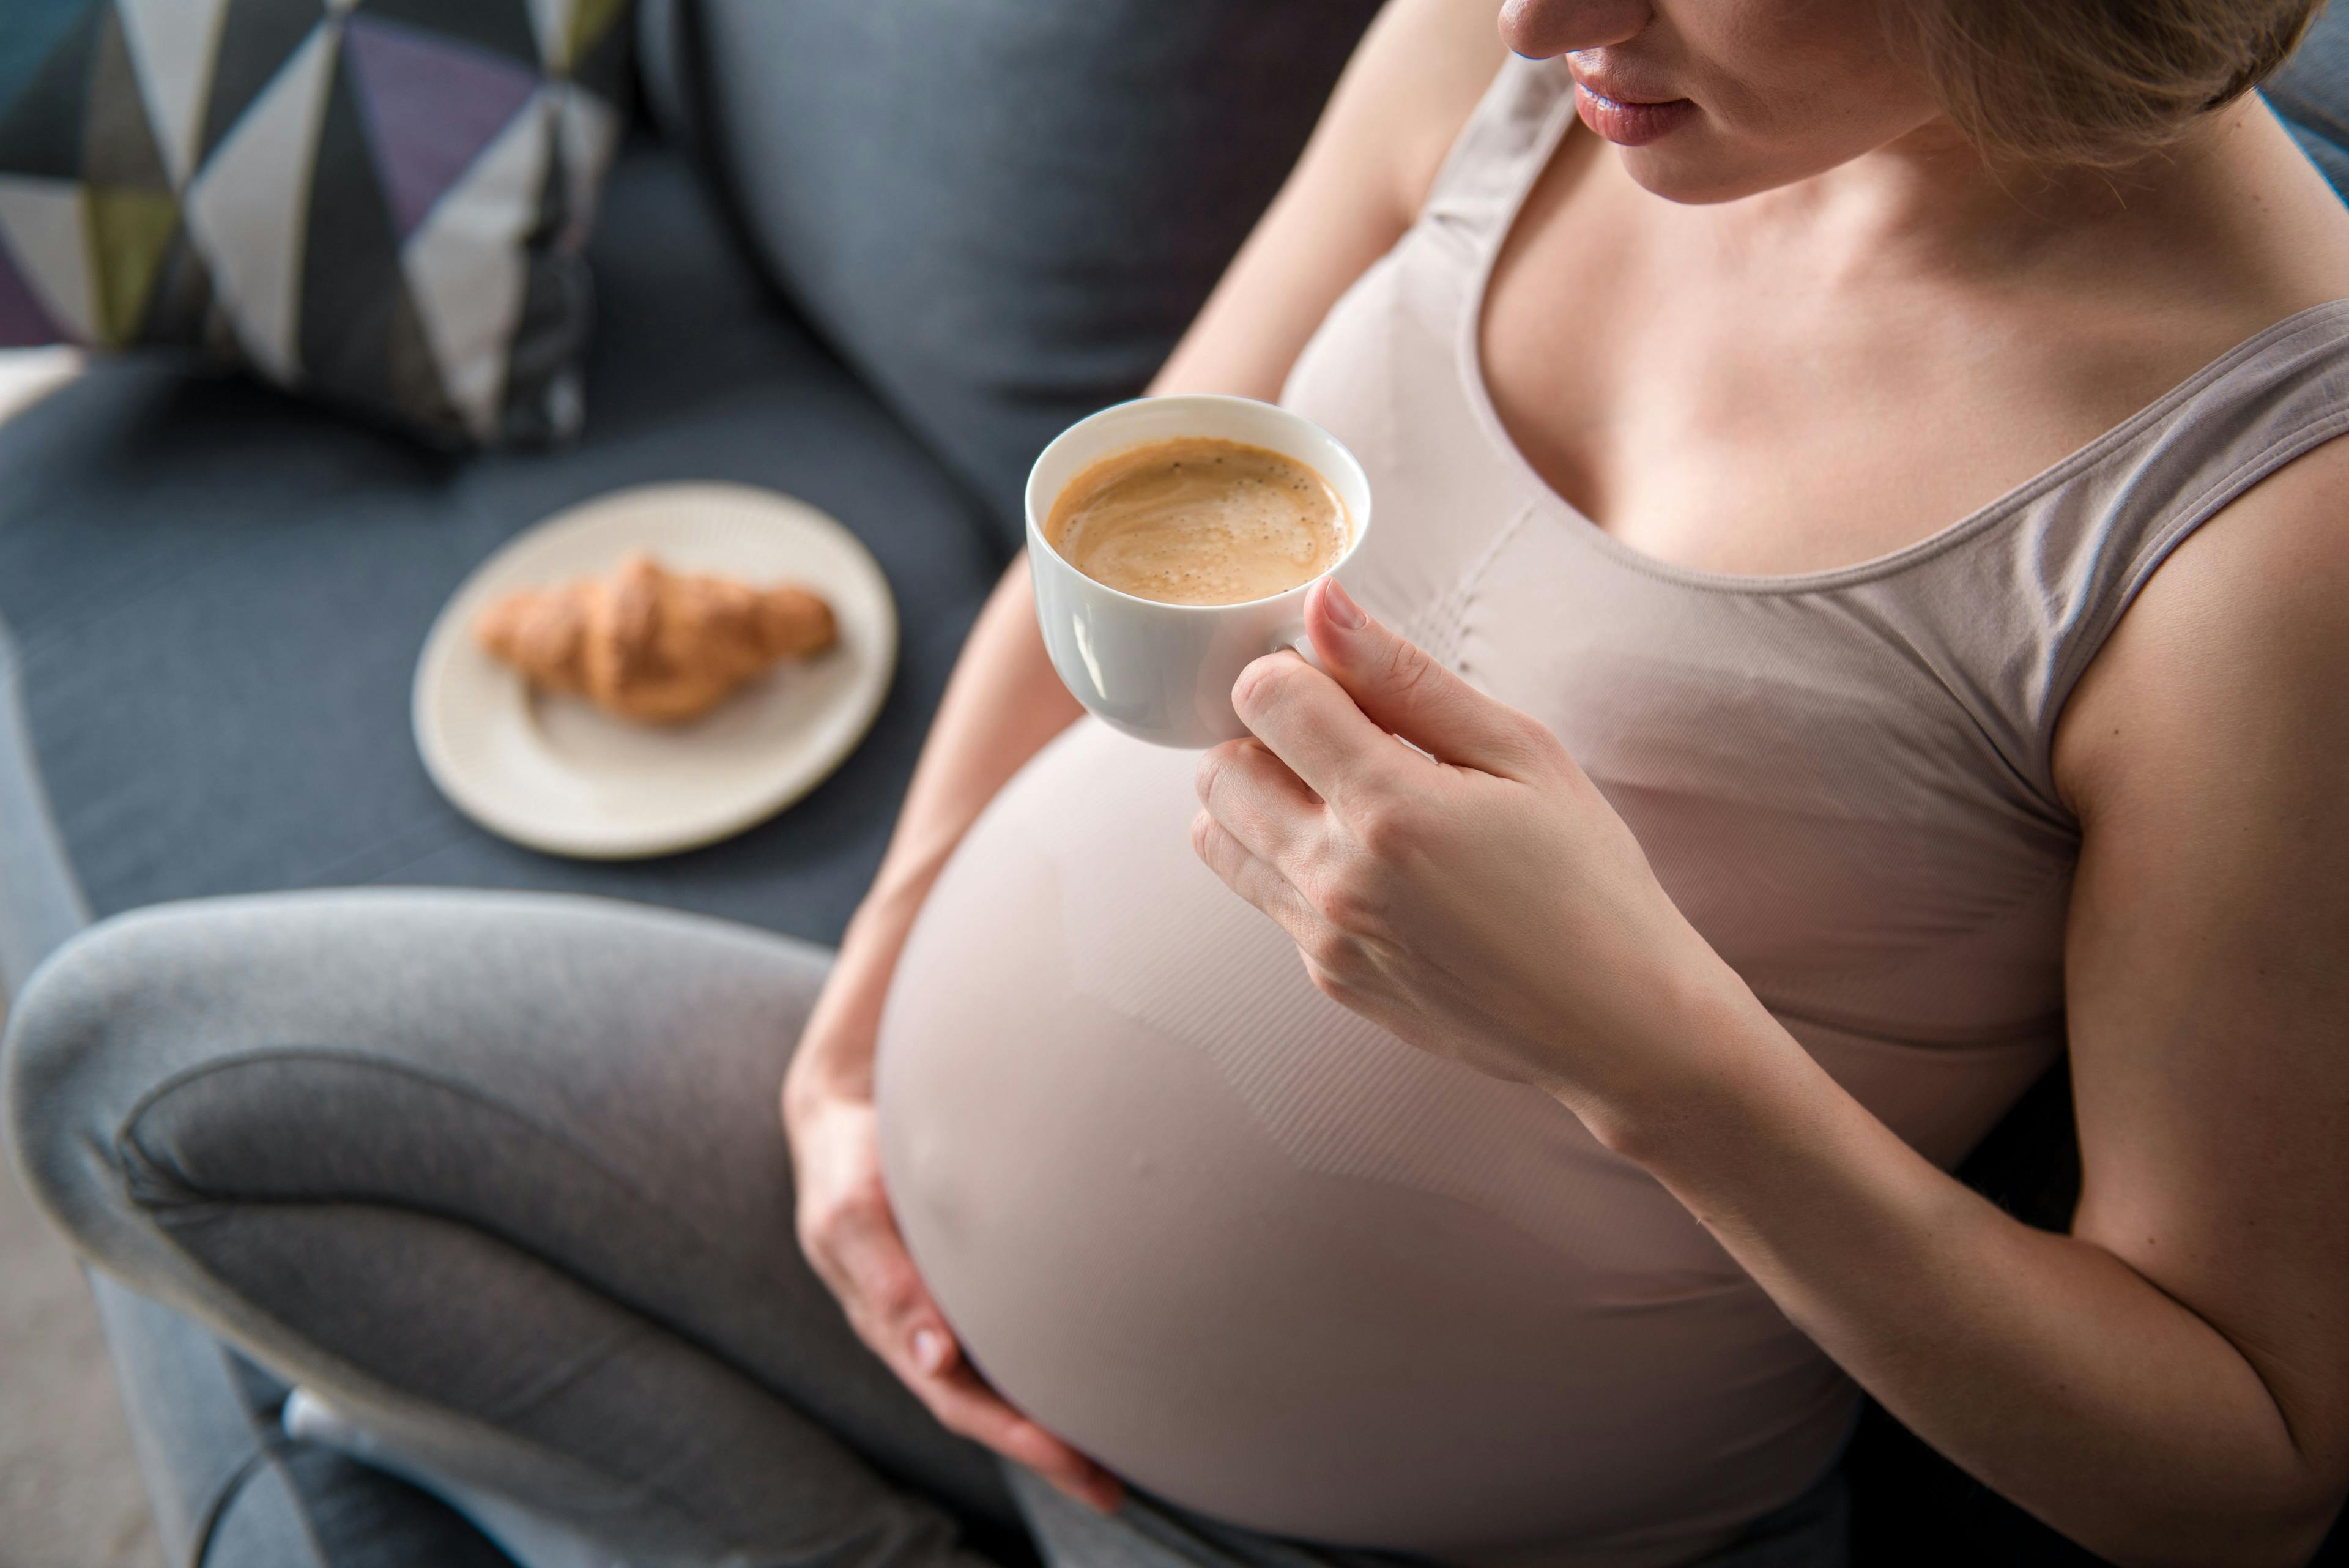 Caffeine consumption during pregnancy could stunt childhood growth